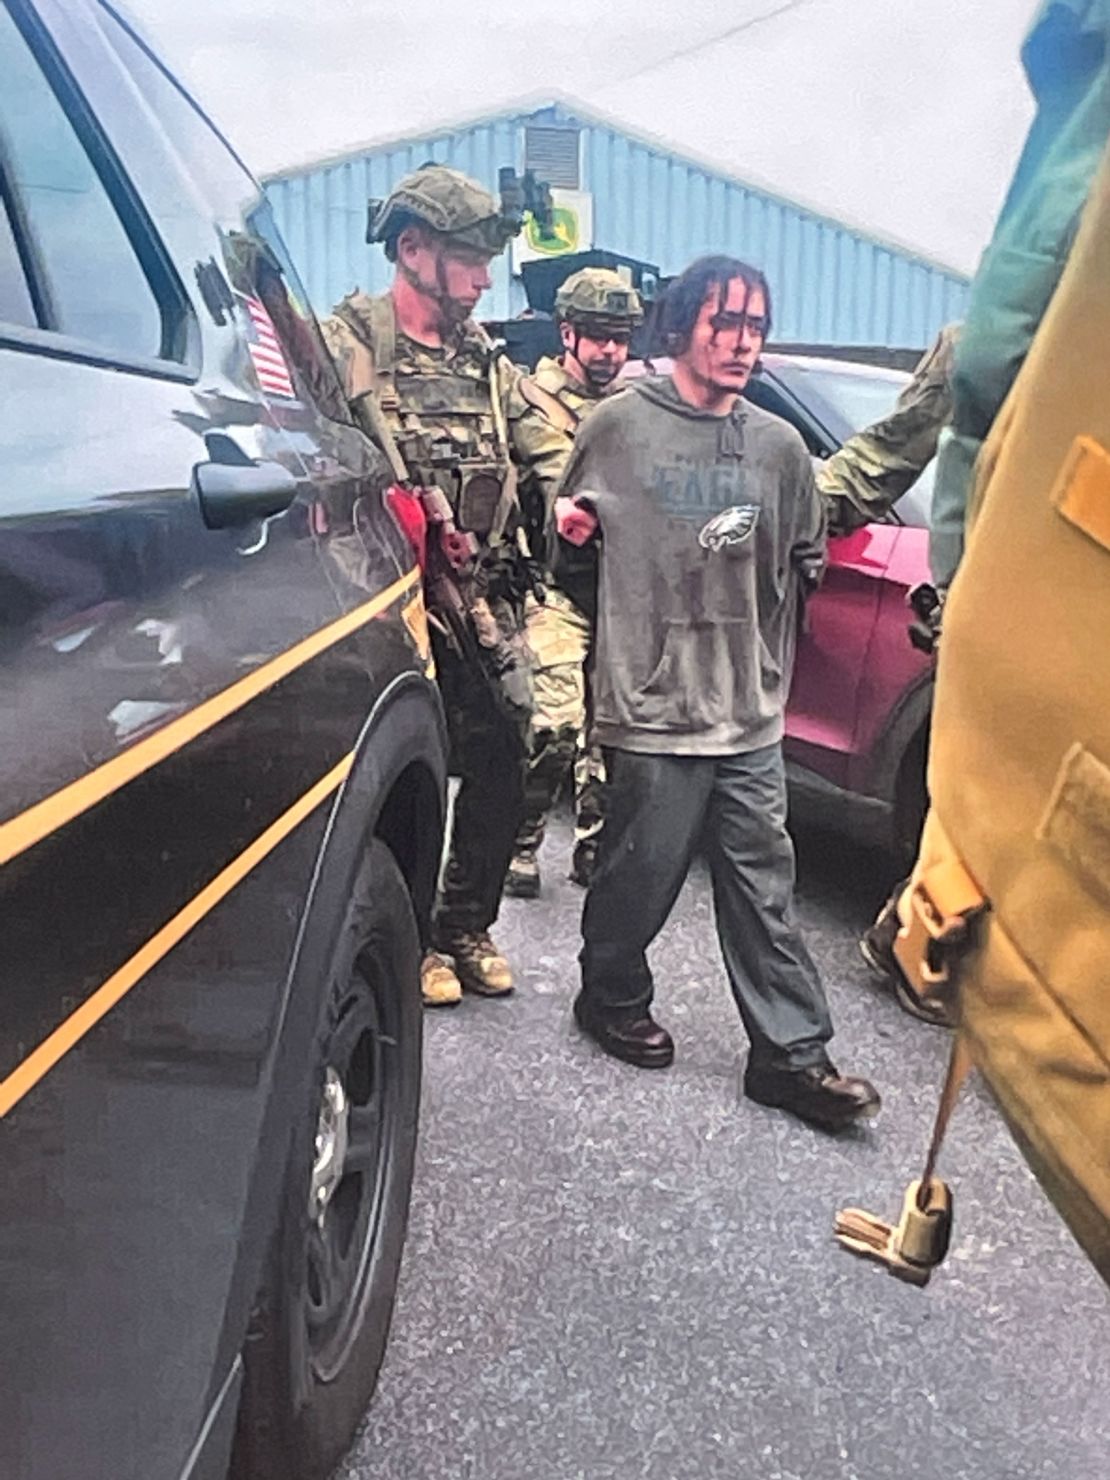 Escaped inmate Danilo Cavalcante is shown after being captured.